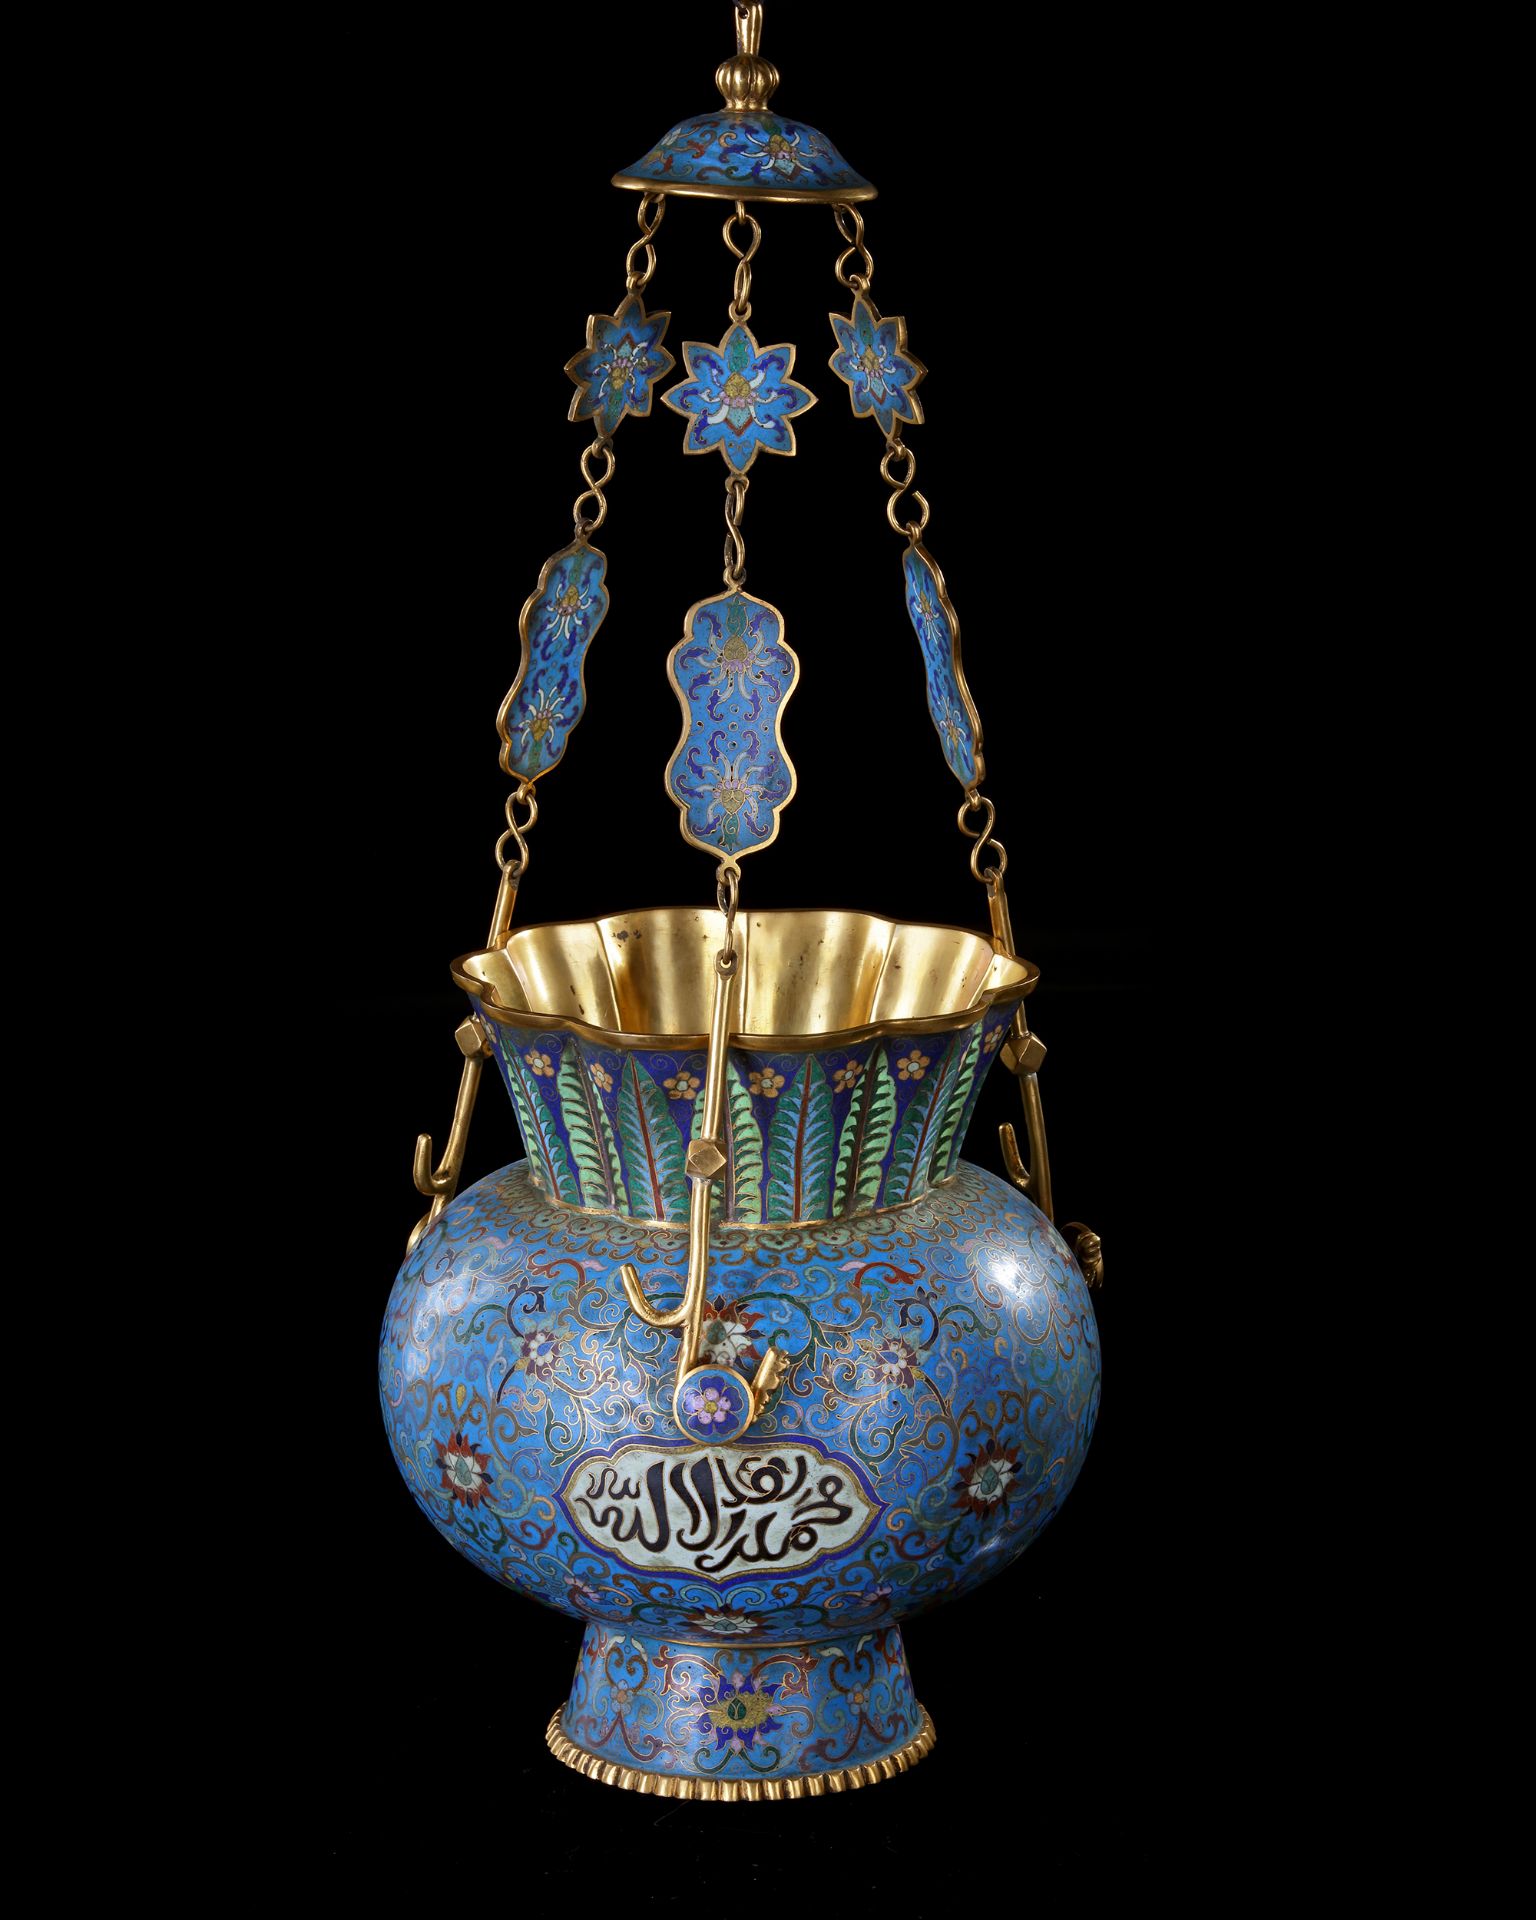 A CHINESE CLOISONNÉ MOSQUE LAMP FOR THE ISLAMIC MARKET, LATE 19TH CENTURY - Image 6 of 10